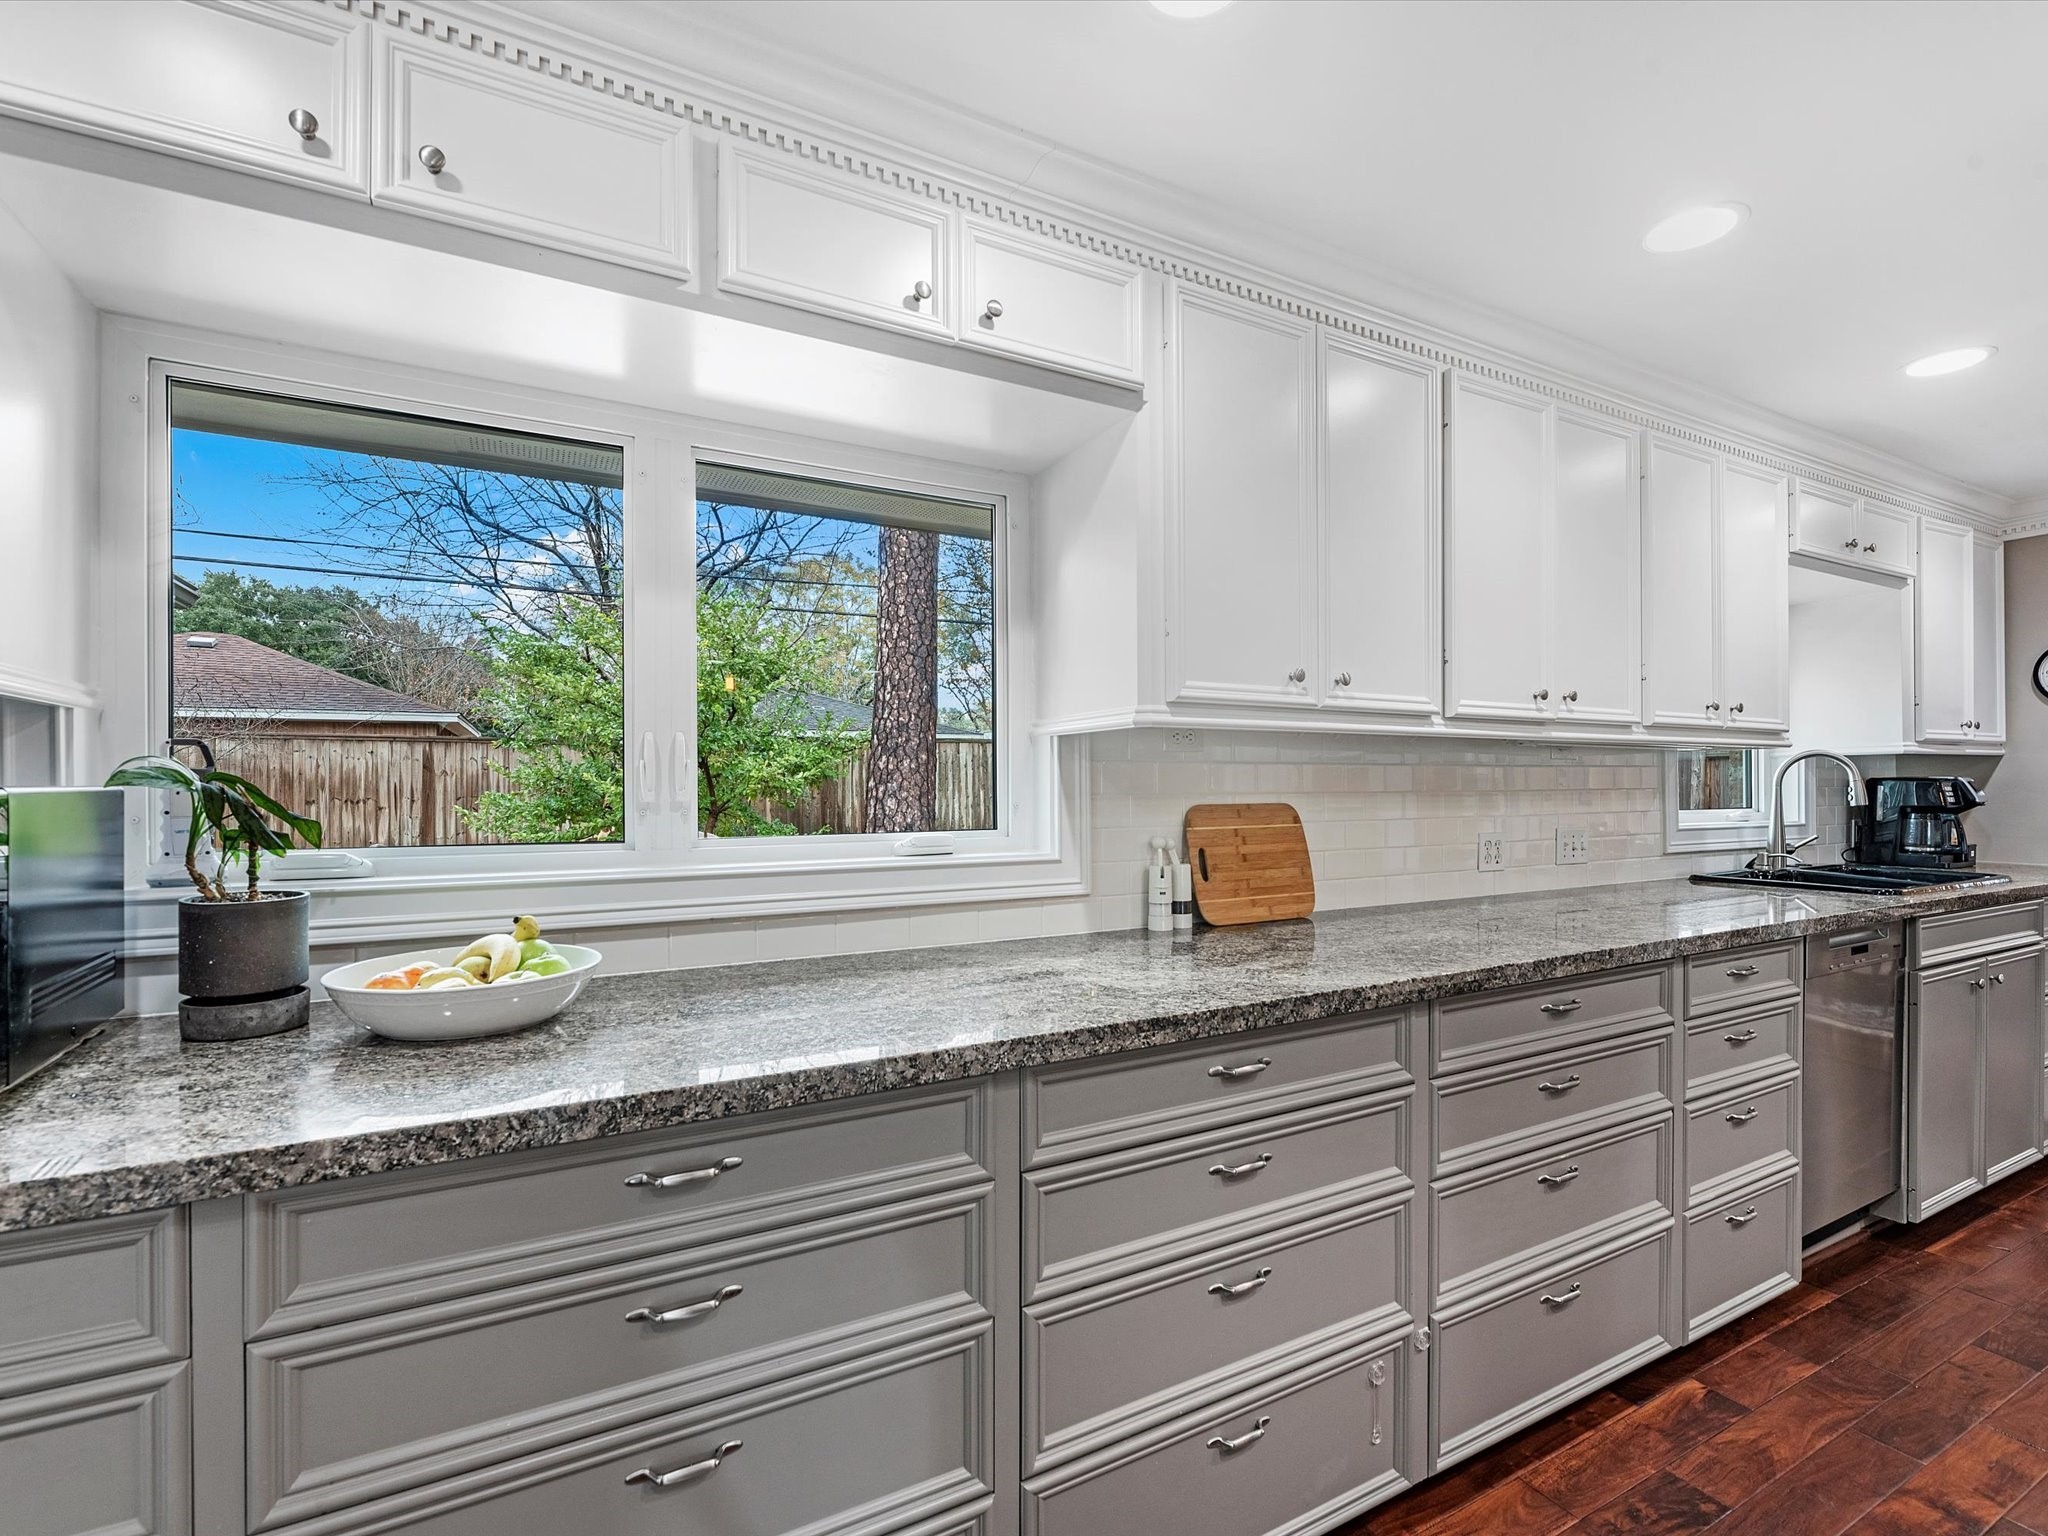 There is no shortage of cabinets and drawers here. Enjoy meal prep or dish cleanup as you gaze into your backyard through two sets of windows!